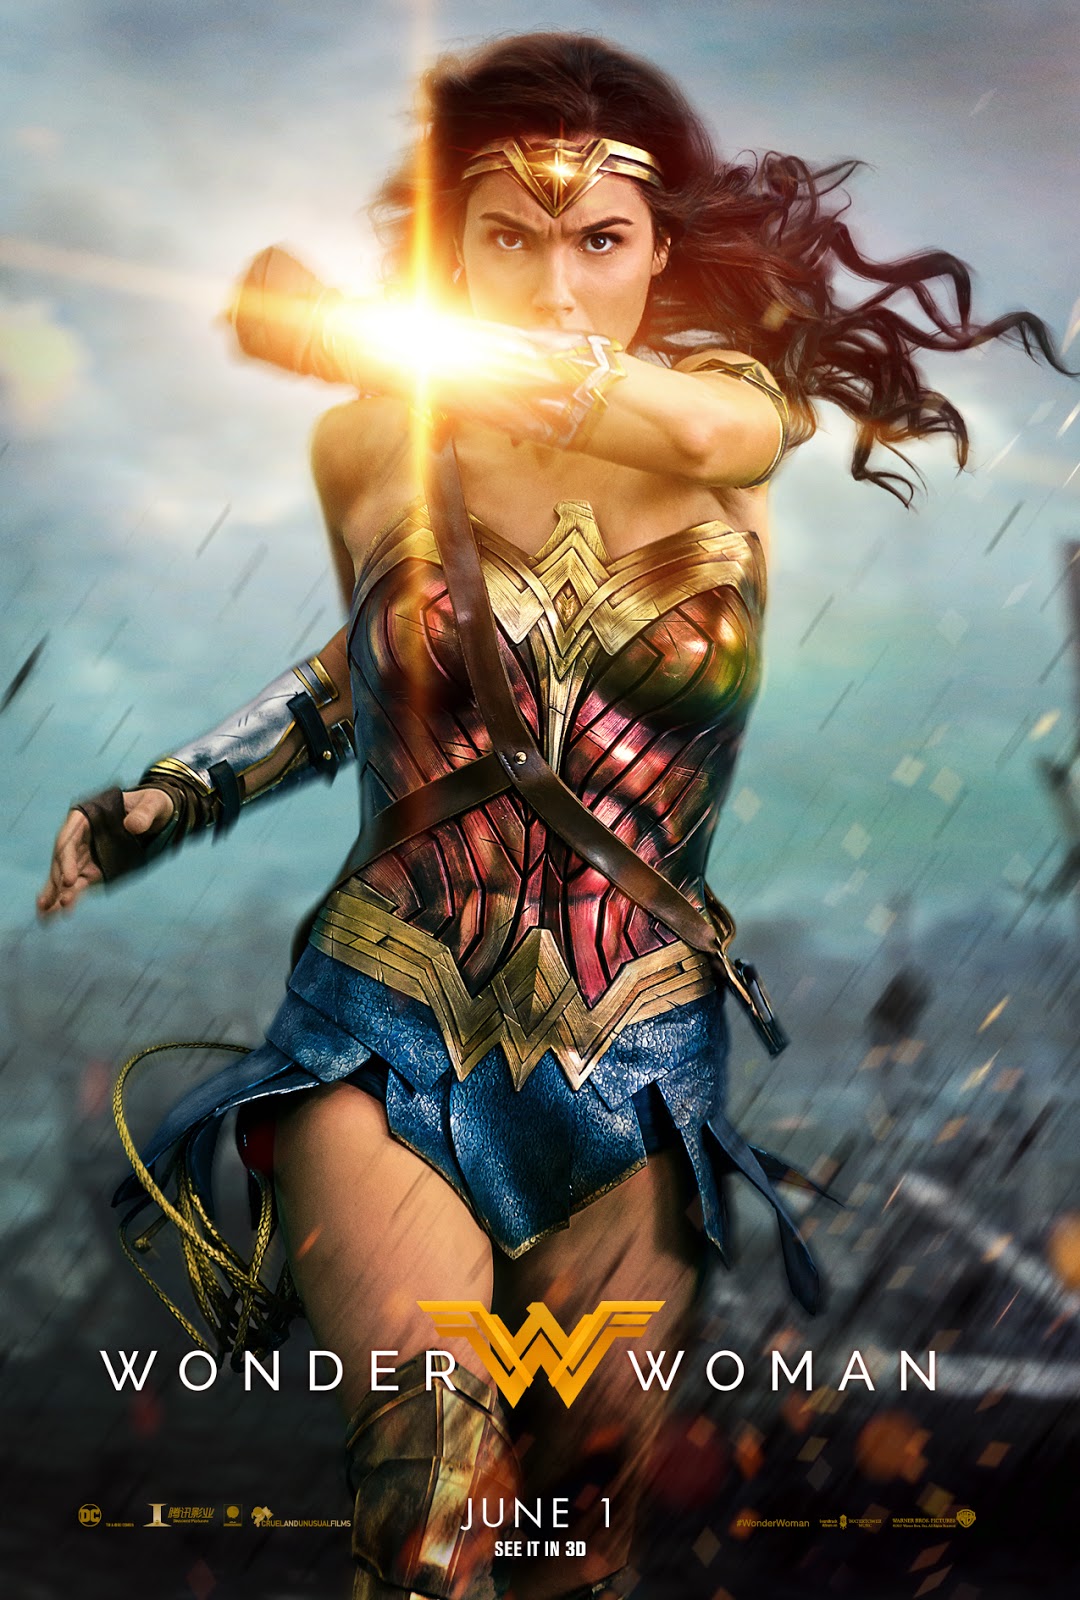 The Crusader S Realm Icymi Wonder Woman Rise Of The Warrior Poster And Final Trailer Show